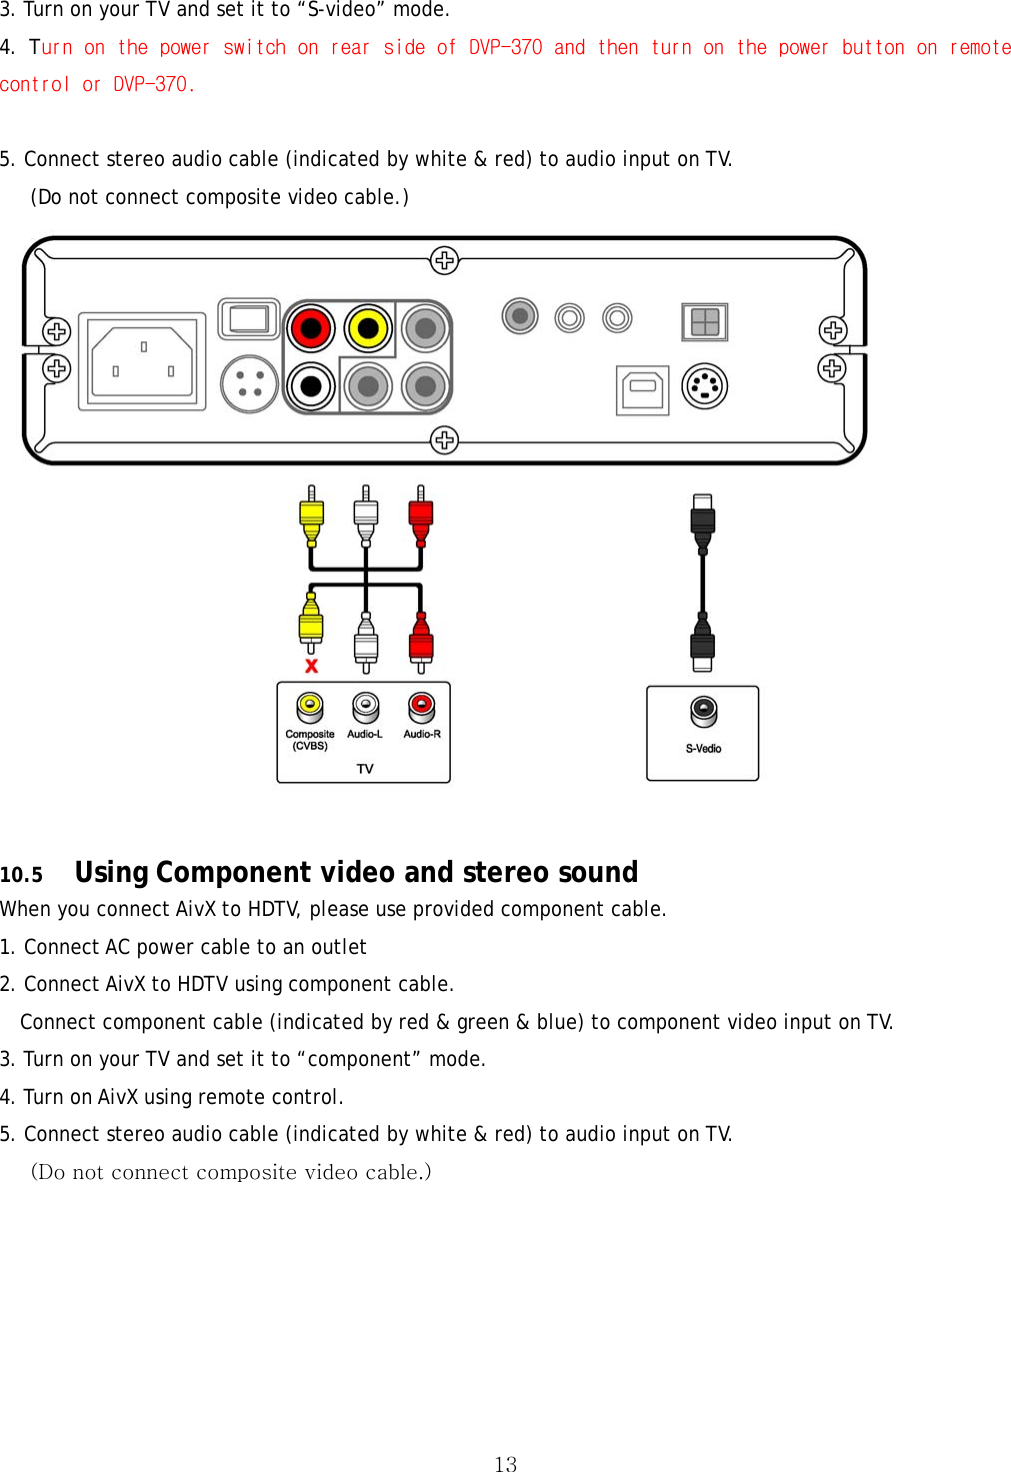  133. Turn on your TV and set it to “S-video” mode. 4. Turn on the power switch on rear side of DVP-370 and then turn on the power button on remote control or DVP-370.  5. Connect stereo audio cable (indicated by white &amp; red) to audio input on TV.       (Do not connect composite video cable.)   10.5 Using Component video and stereo sound When you connect AivX to HDTV, please use provided component cable. 1. Connect AC power cable to an outlet 2. Connect AivX to HDTV using component cable. Connect component cable (indicated by red &amp; green &amp; blue) to component video input on TV. 3. Turn on your TV and set it to “component” mode. 4. Turn on AivX using remote control. 5. Connect stereo audio cable (indicated by white &amp; red) to audio input on TV.       (Do not connect composite video cable.) 